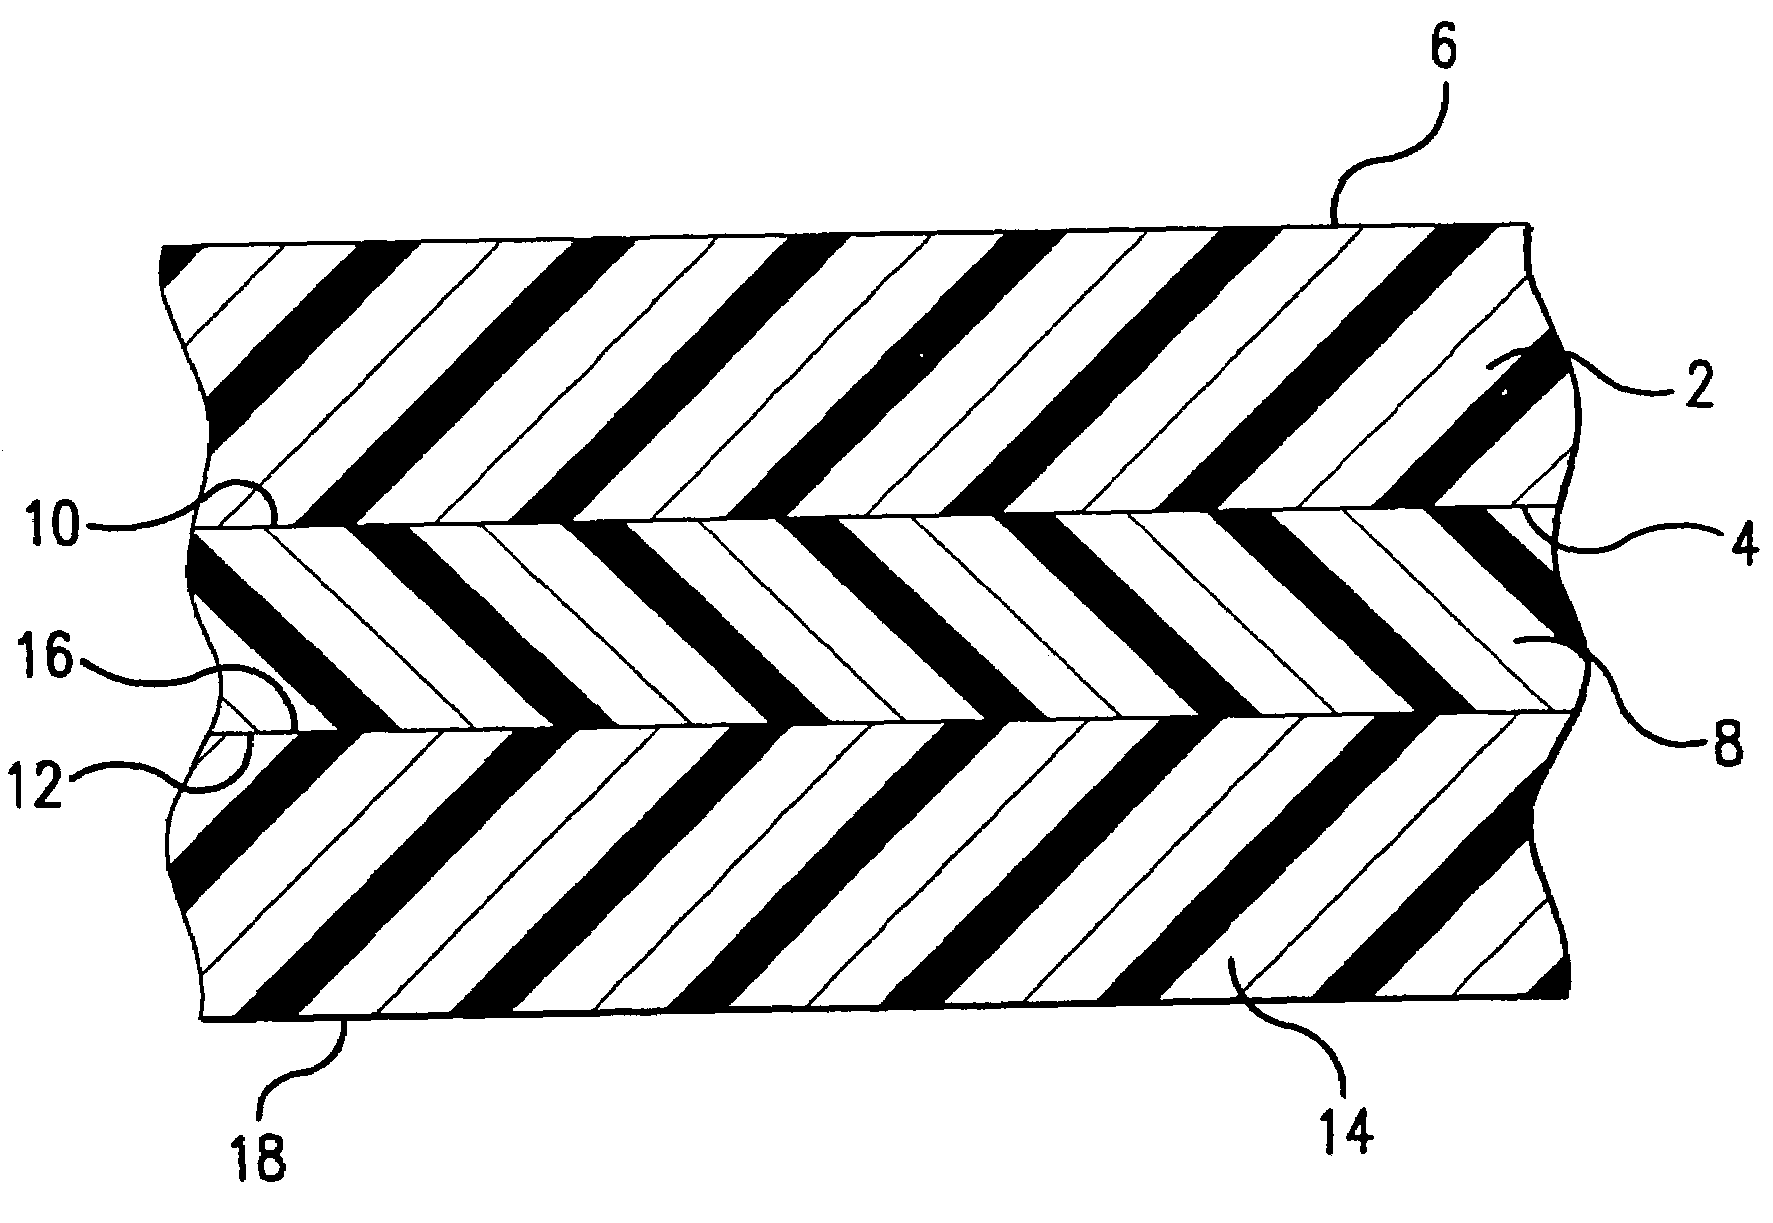 Polyester or copolyester/polyolefin laminate structures and methods of making the same